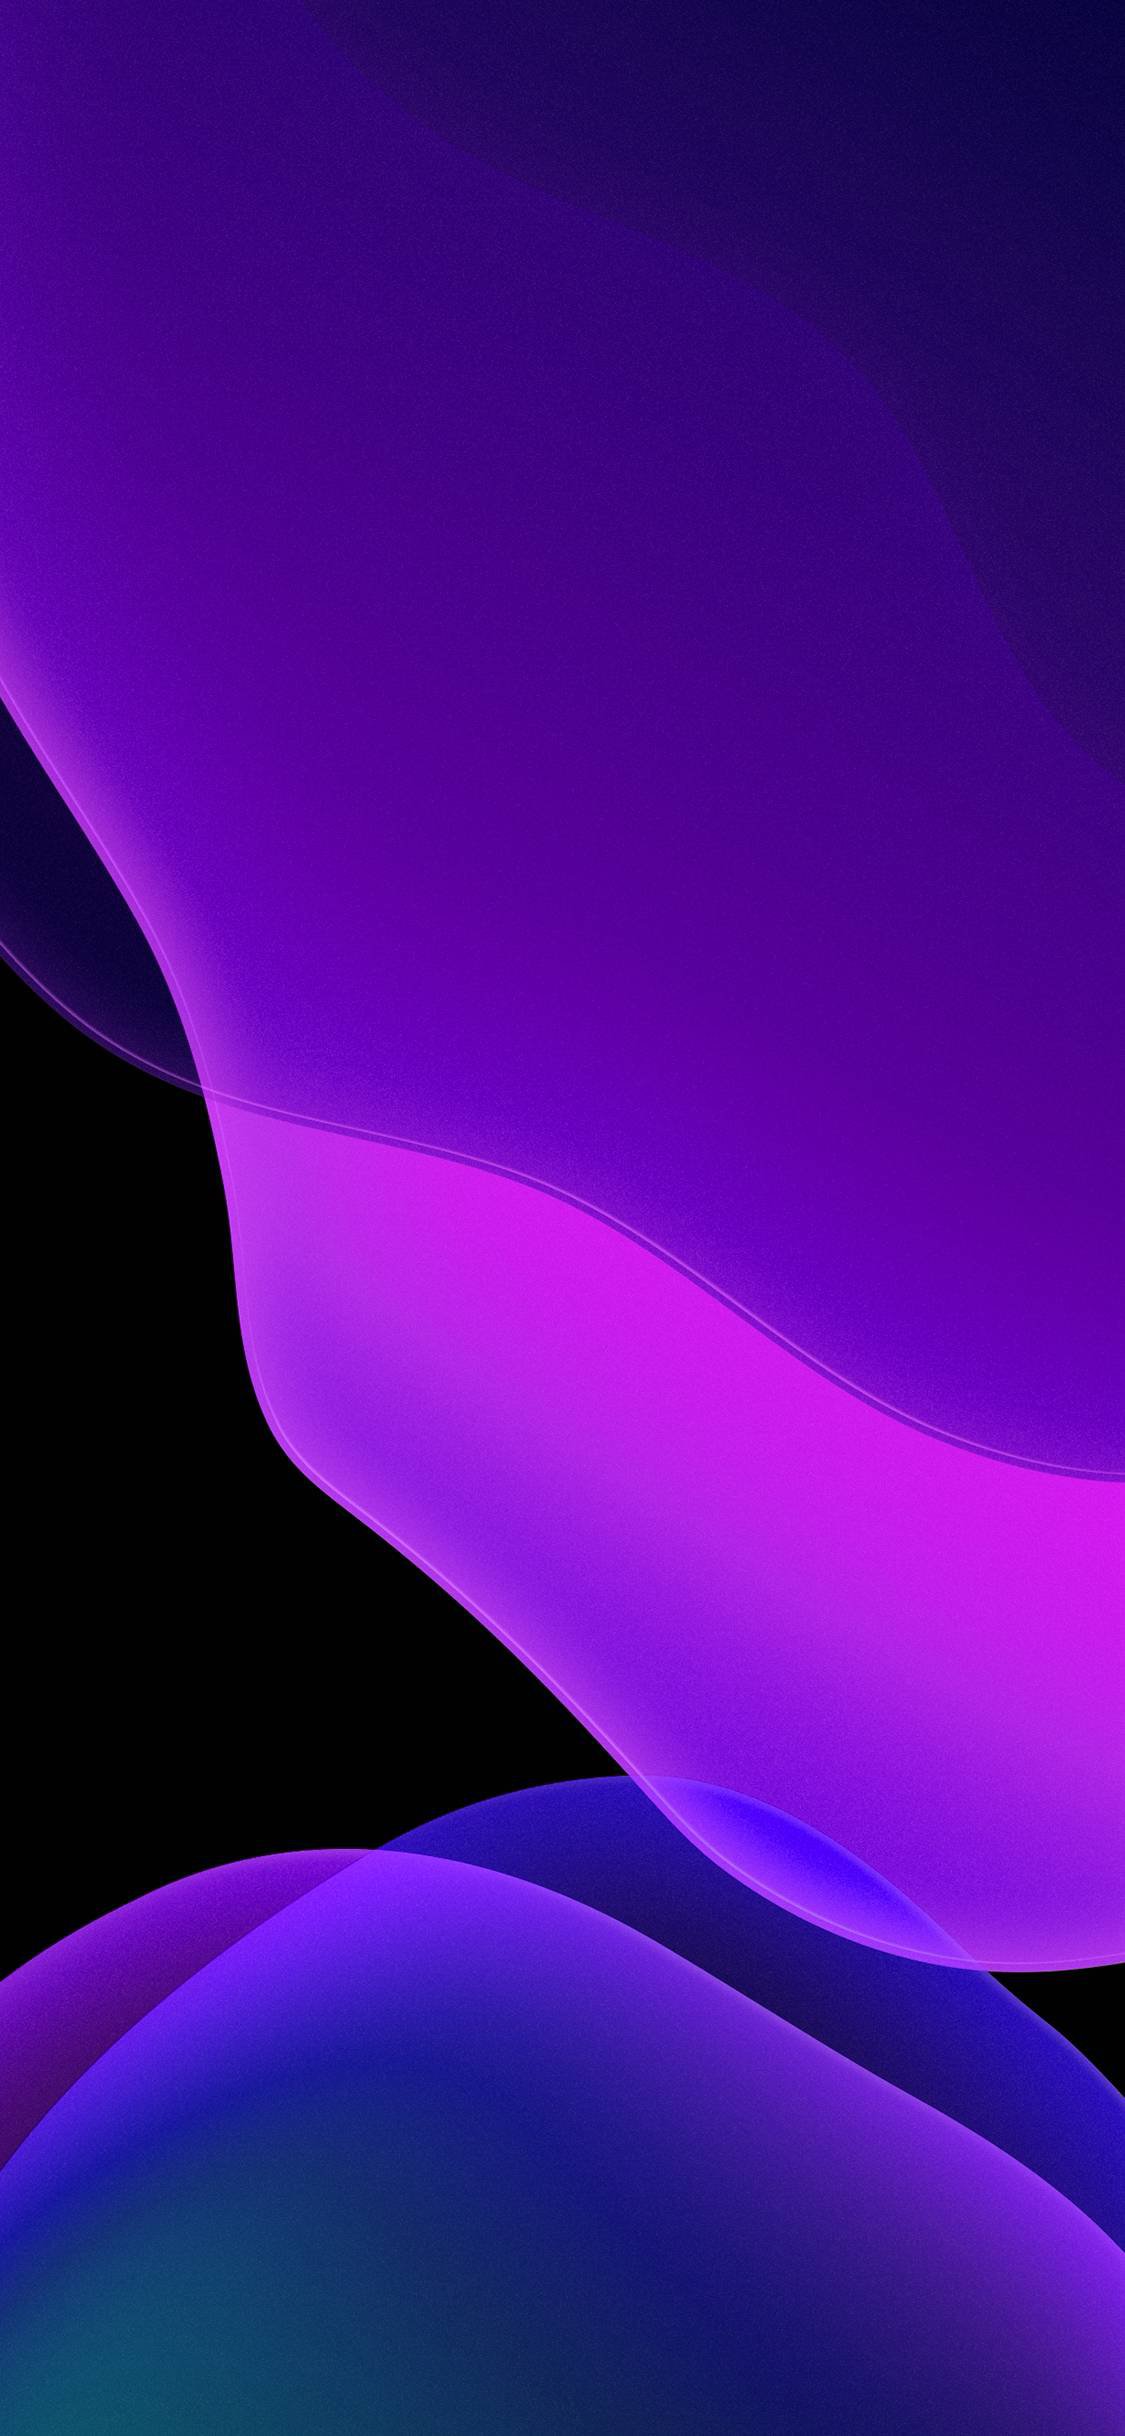 Ios 13 Wallpapers posted by Ethan Johnson